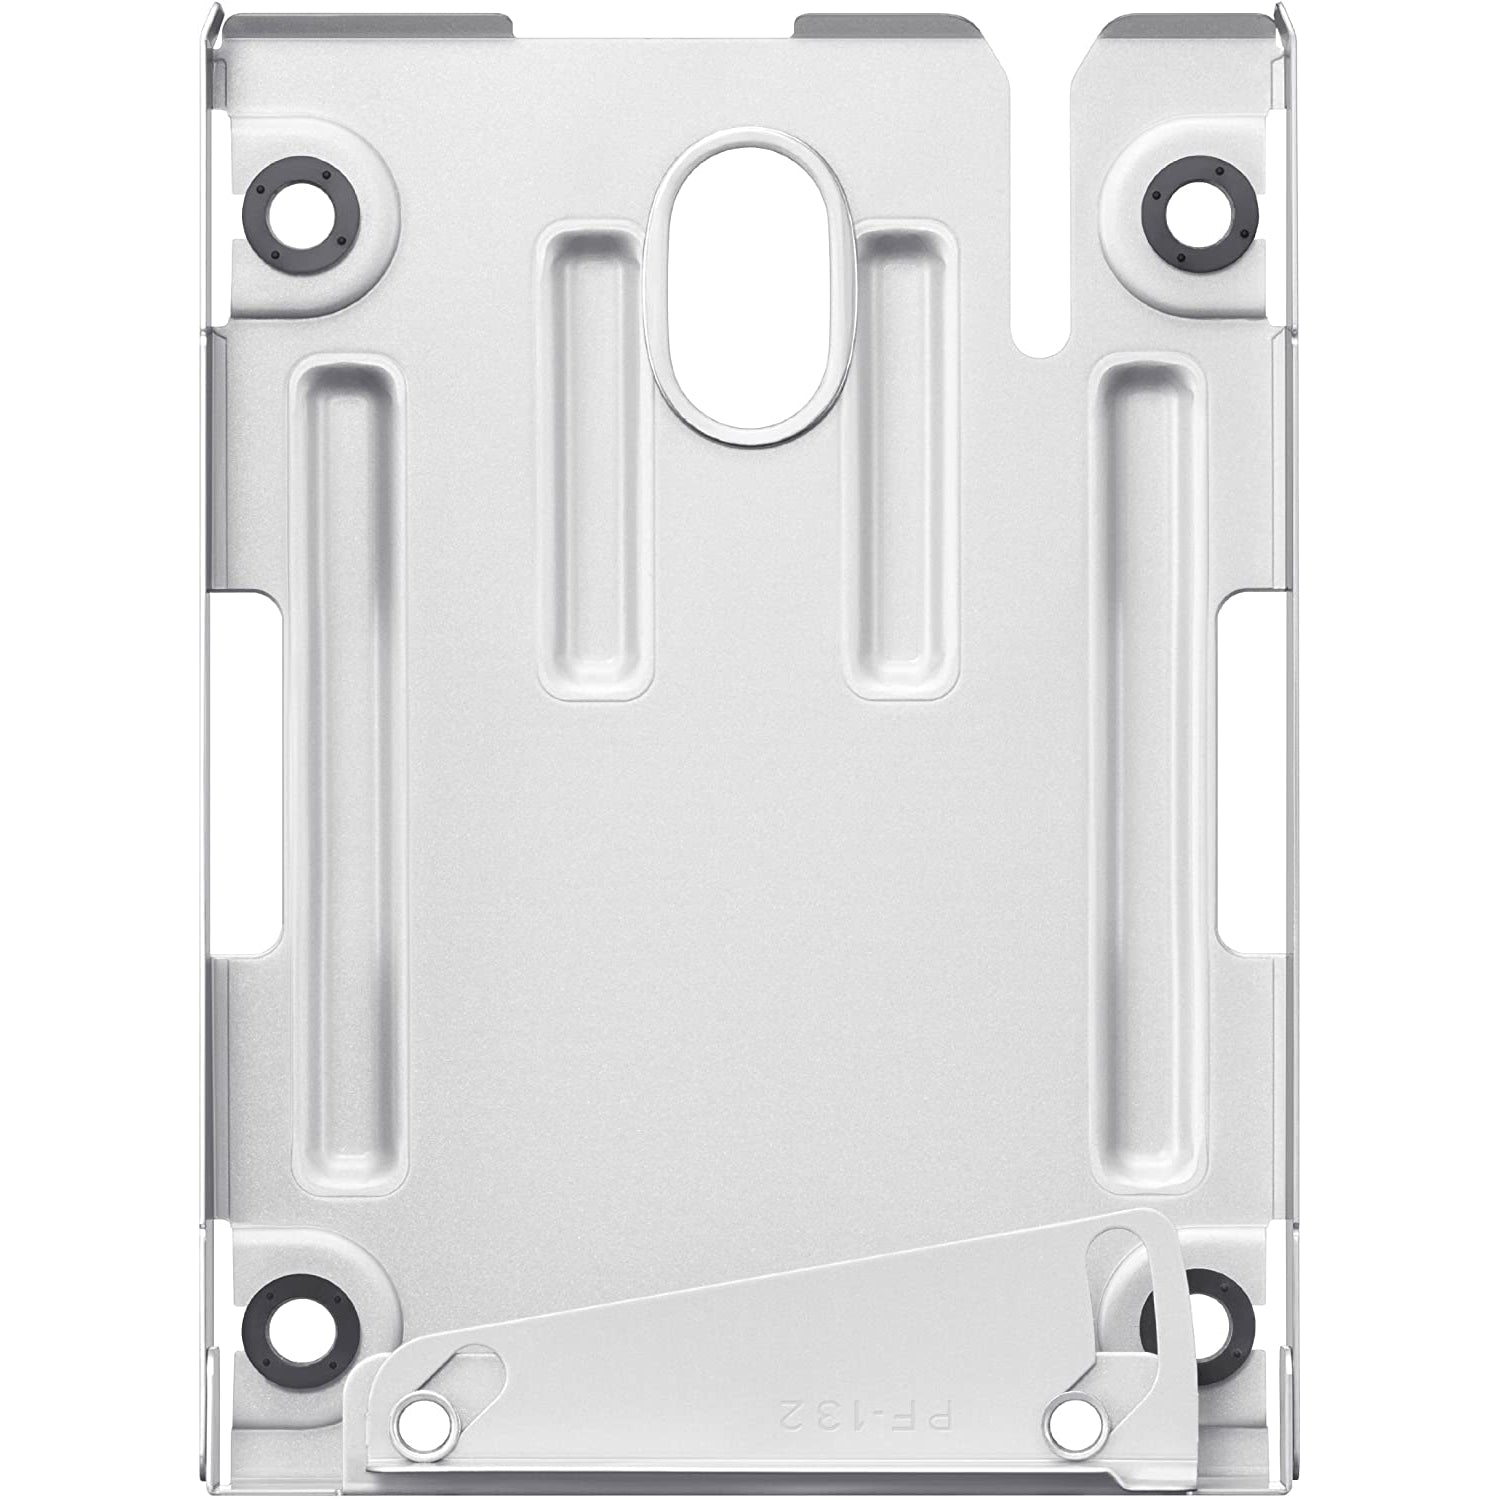 Sony PlayStation 3 Hard Disk Drive (HDD) with Mounting Bracket